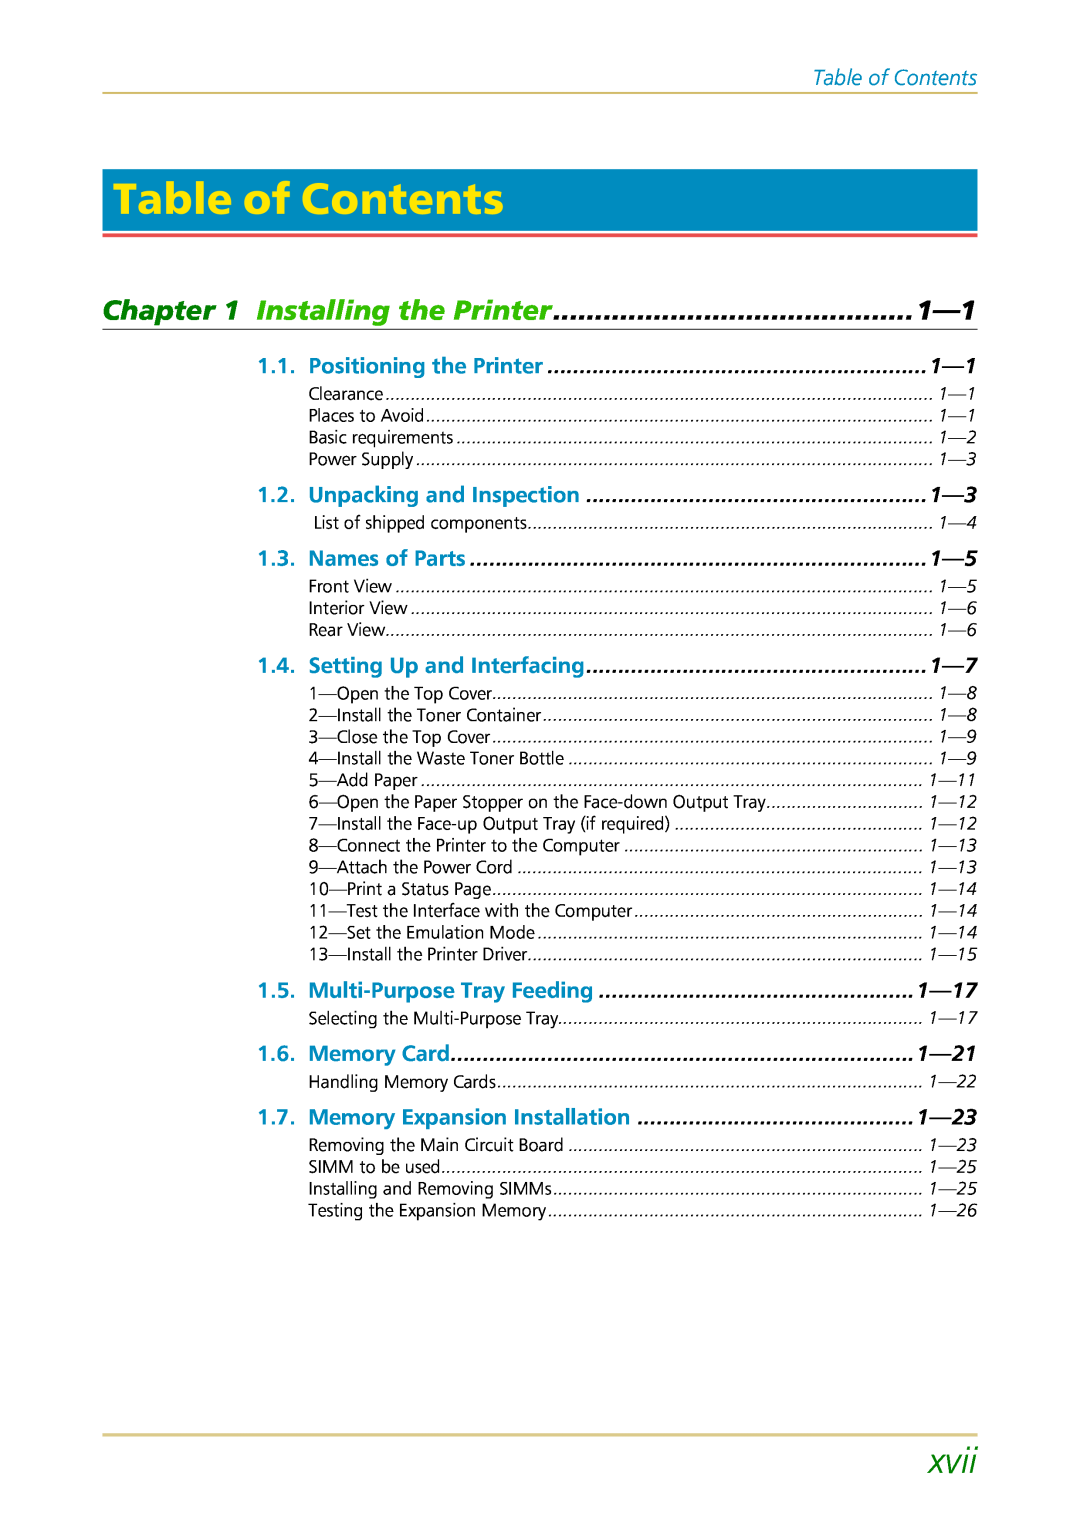 Kyocera FS-1700 user manual Table of Contents, xvii, Installing the Printer 